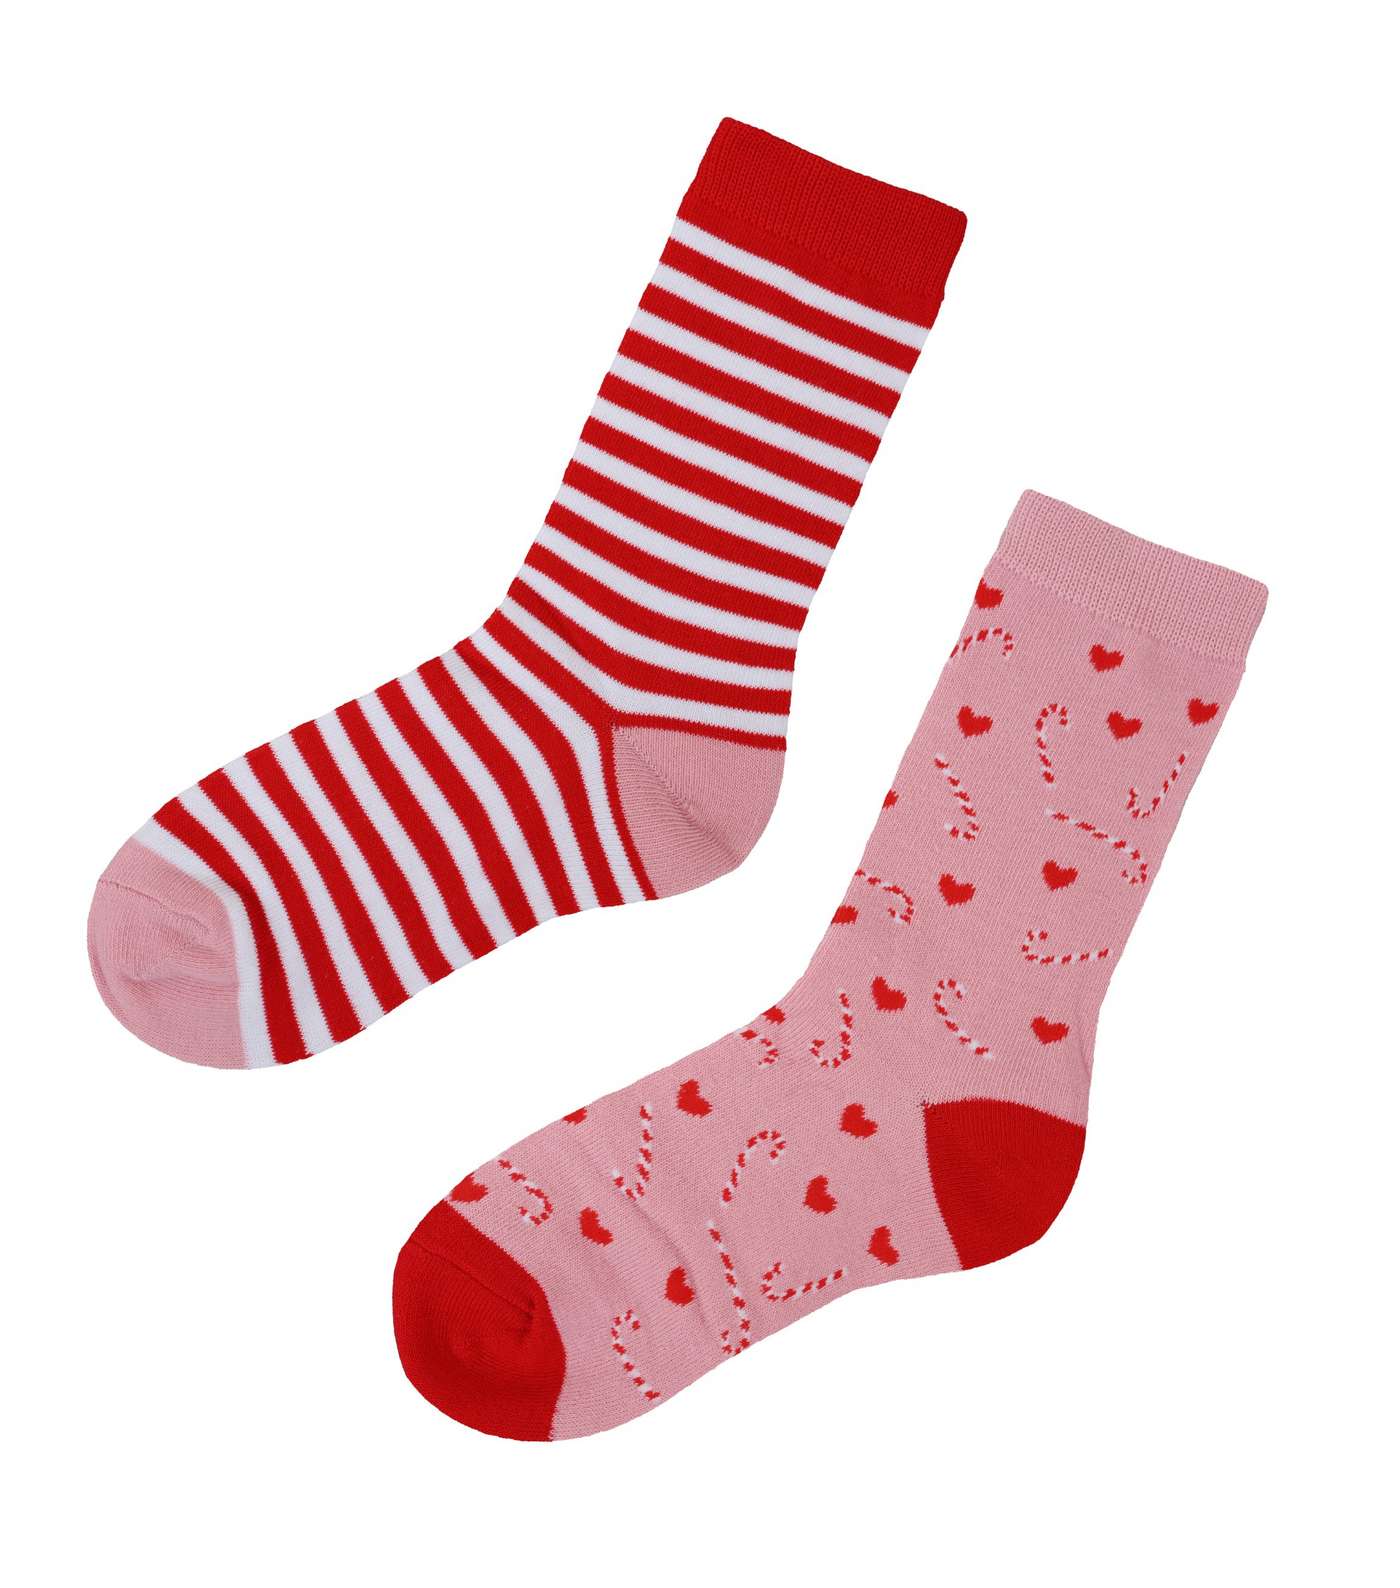 Loungeable Pink Heart Candy Cane Socks in a Sock Bag Image 3